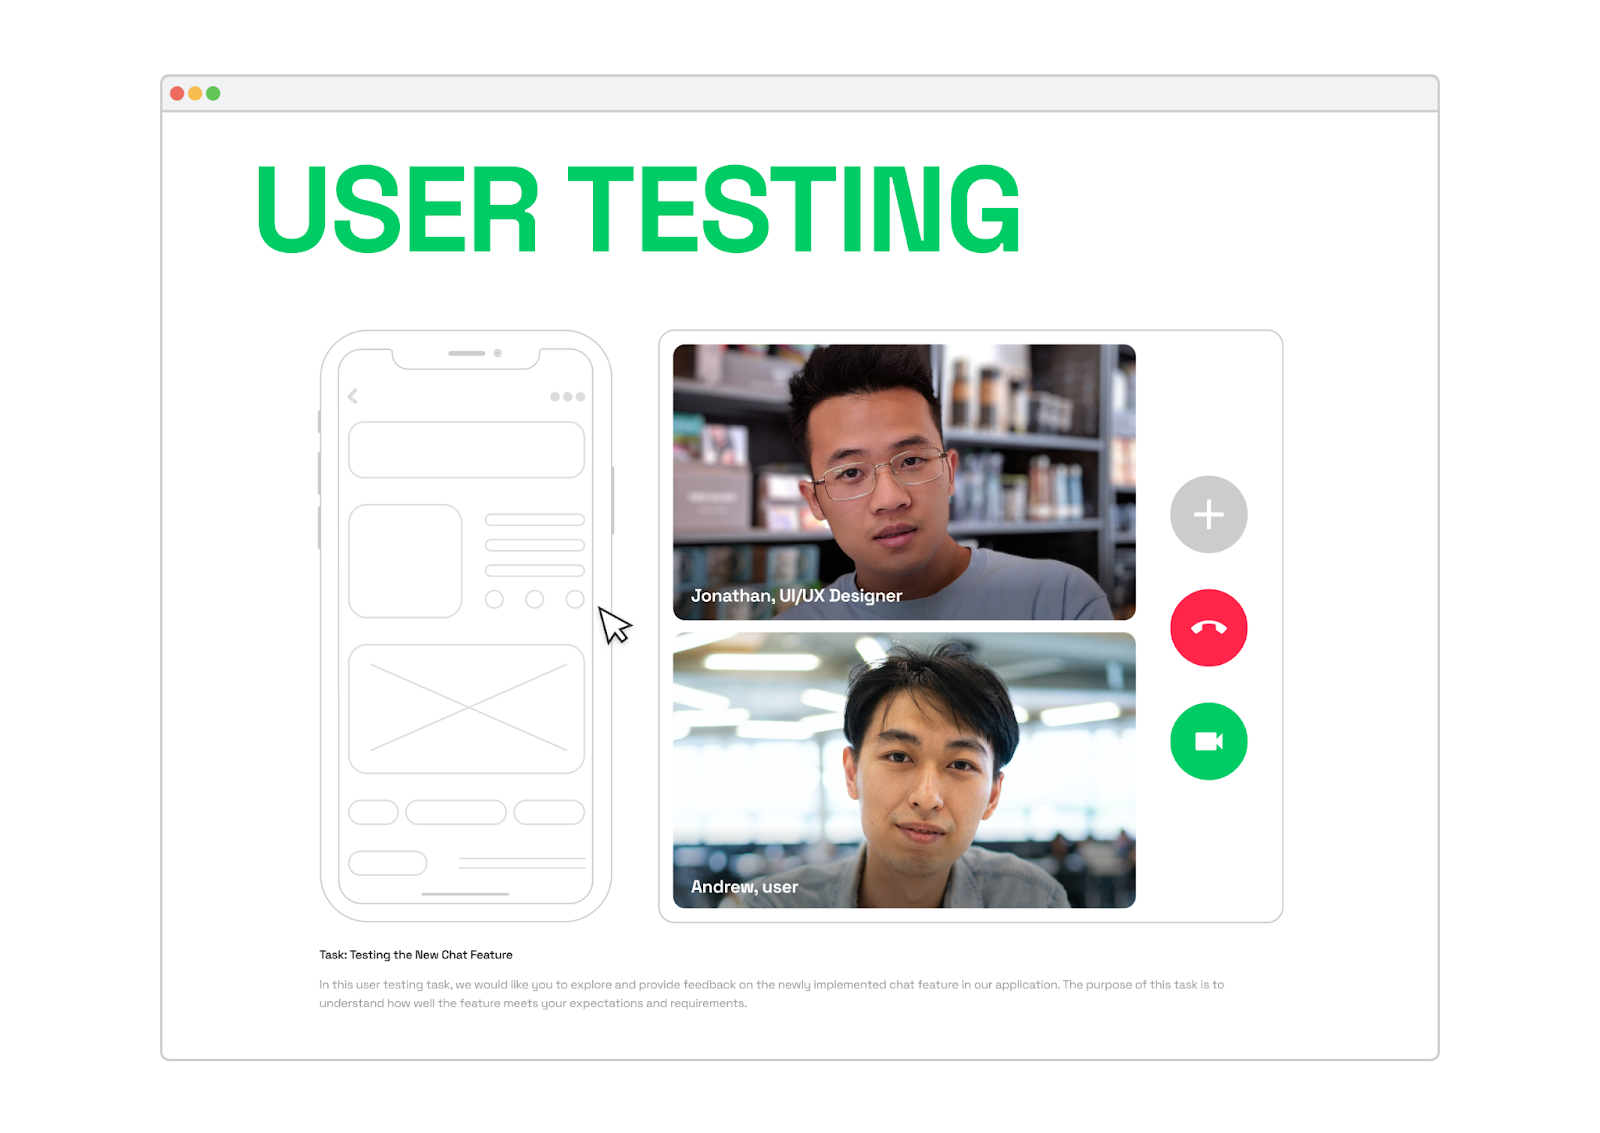 How to identify and fix app design issues. Step 4: Test your app on real people (conduct usability testing)
